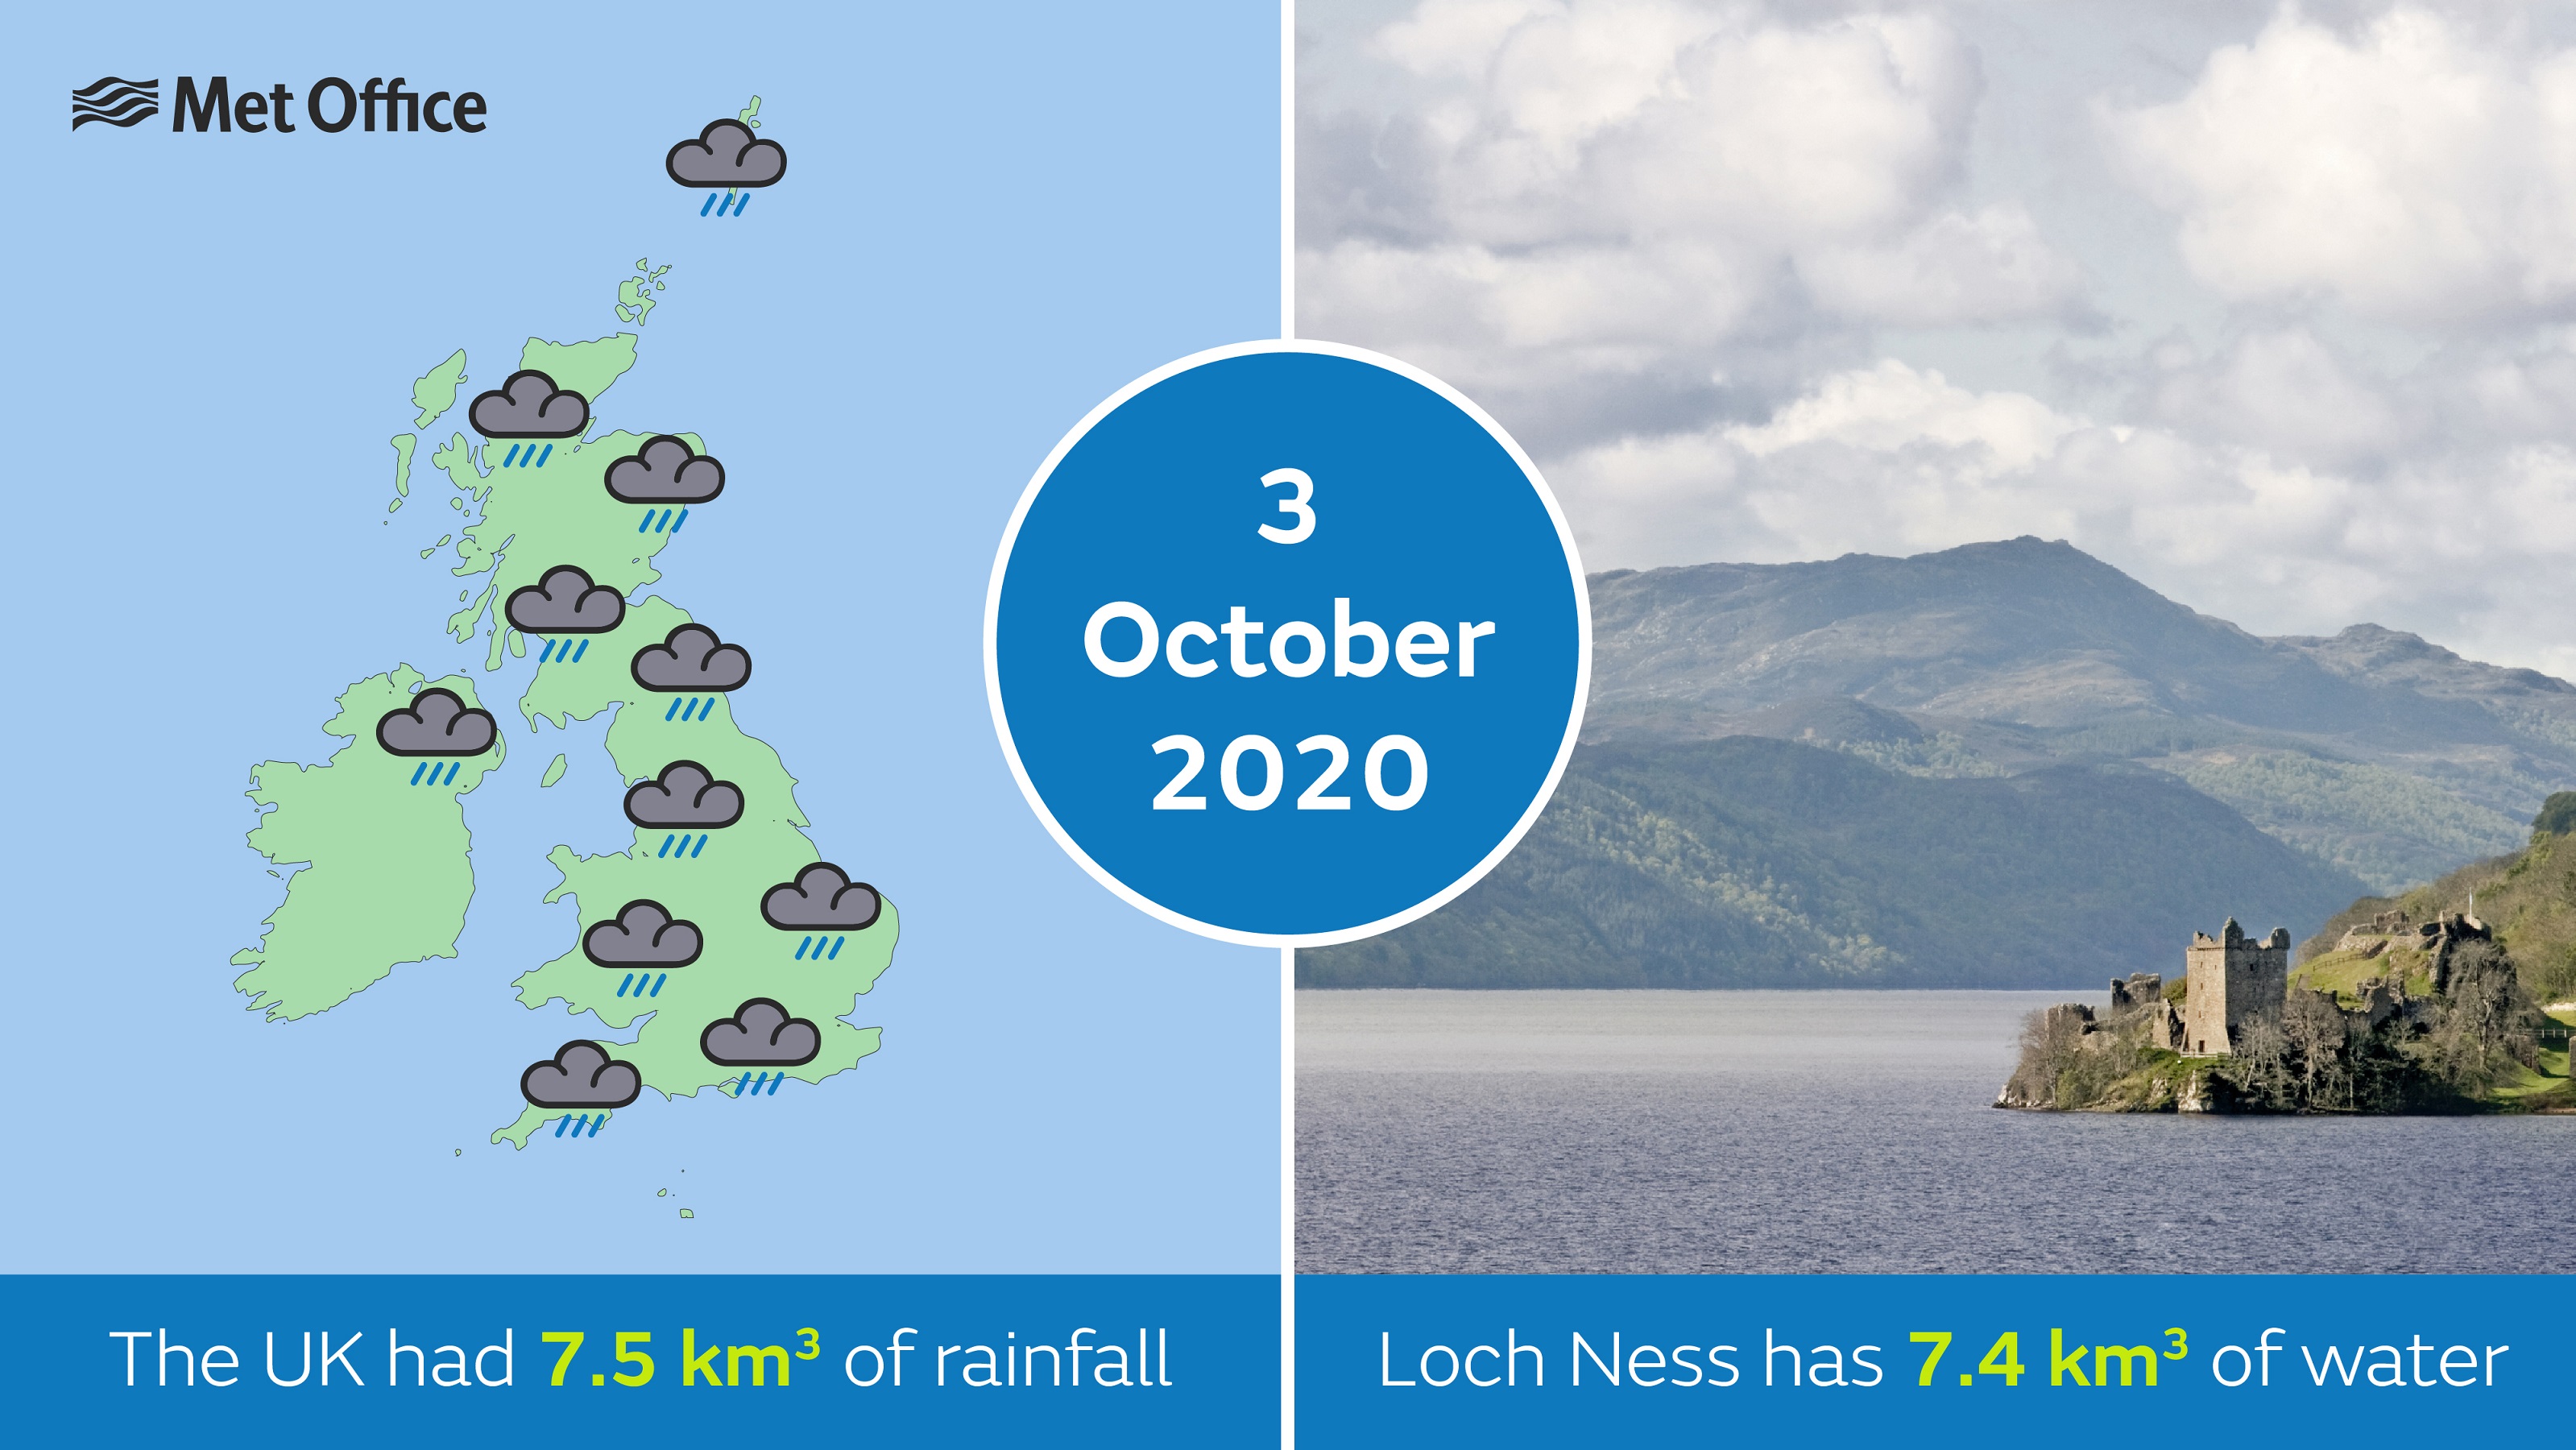 On 3 October 2020, it was the wettest day in the UK in records dating back to 1891. The UK had 7.5 km³ of rainfall, enough to fill Loch Ness.